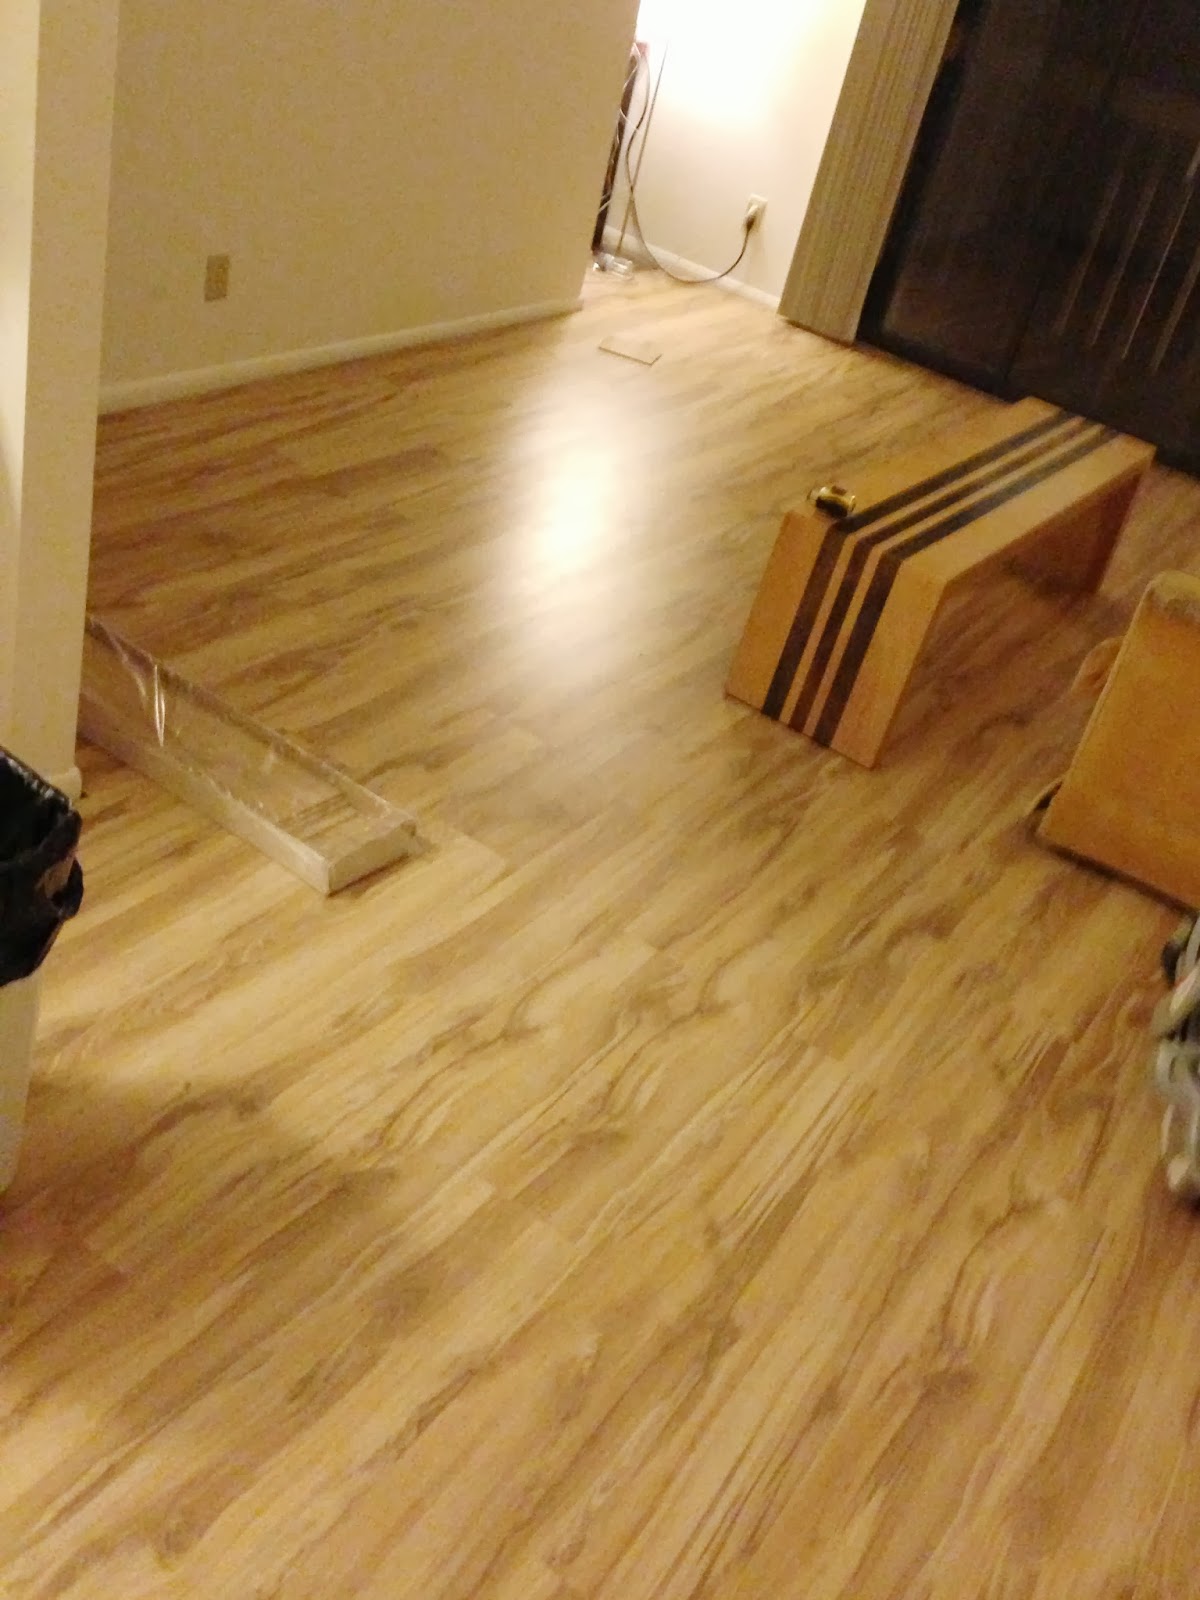 How We Put Hardwood Over Carpet Messymom, Can You Put Laminate Flooring Over Glued Down Carpet